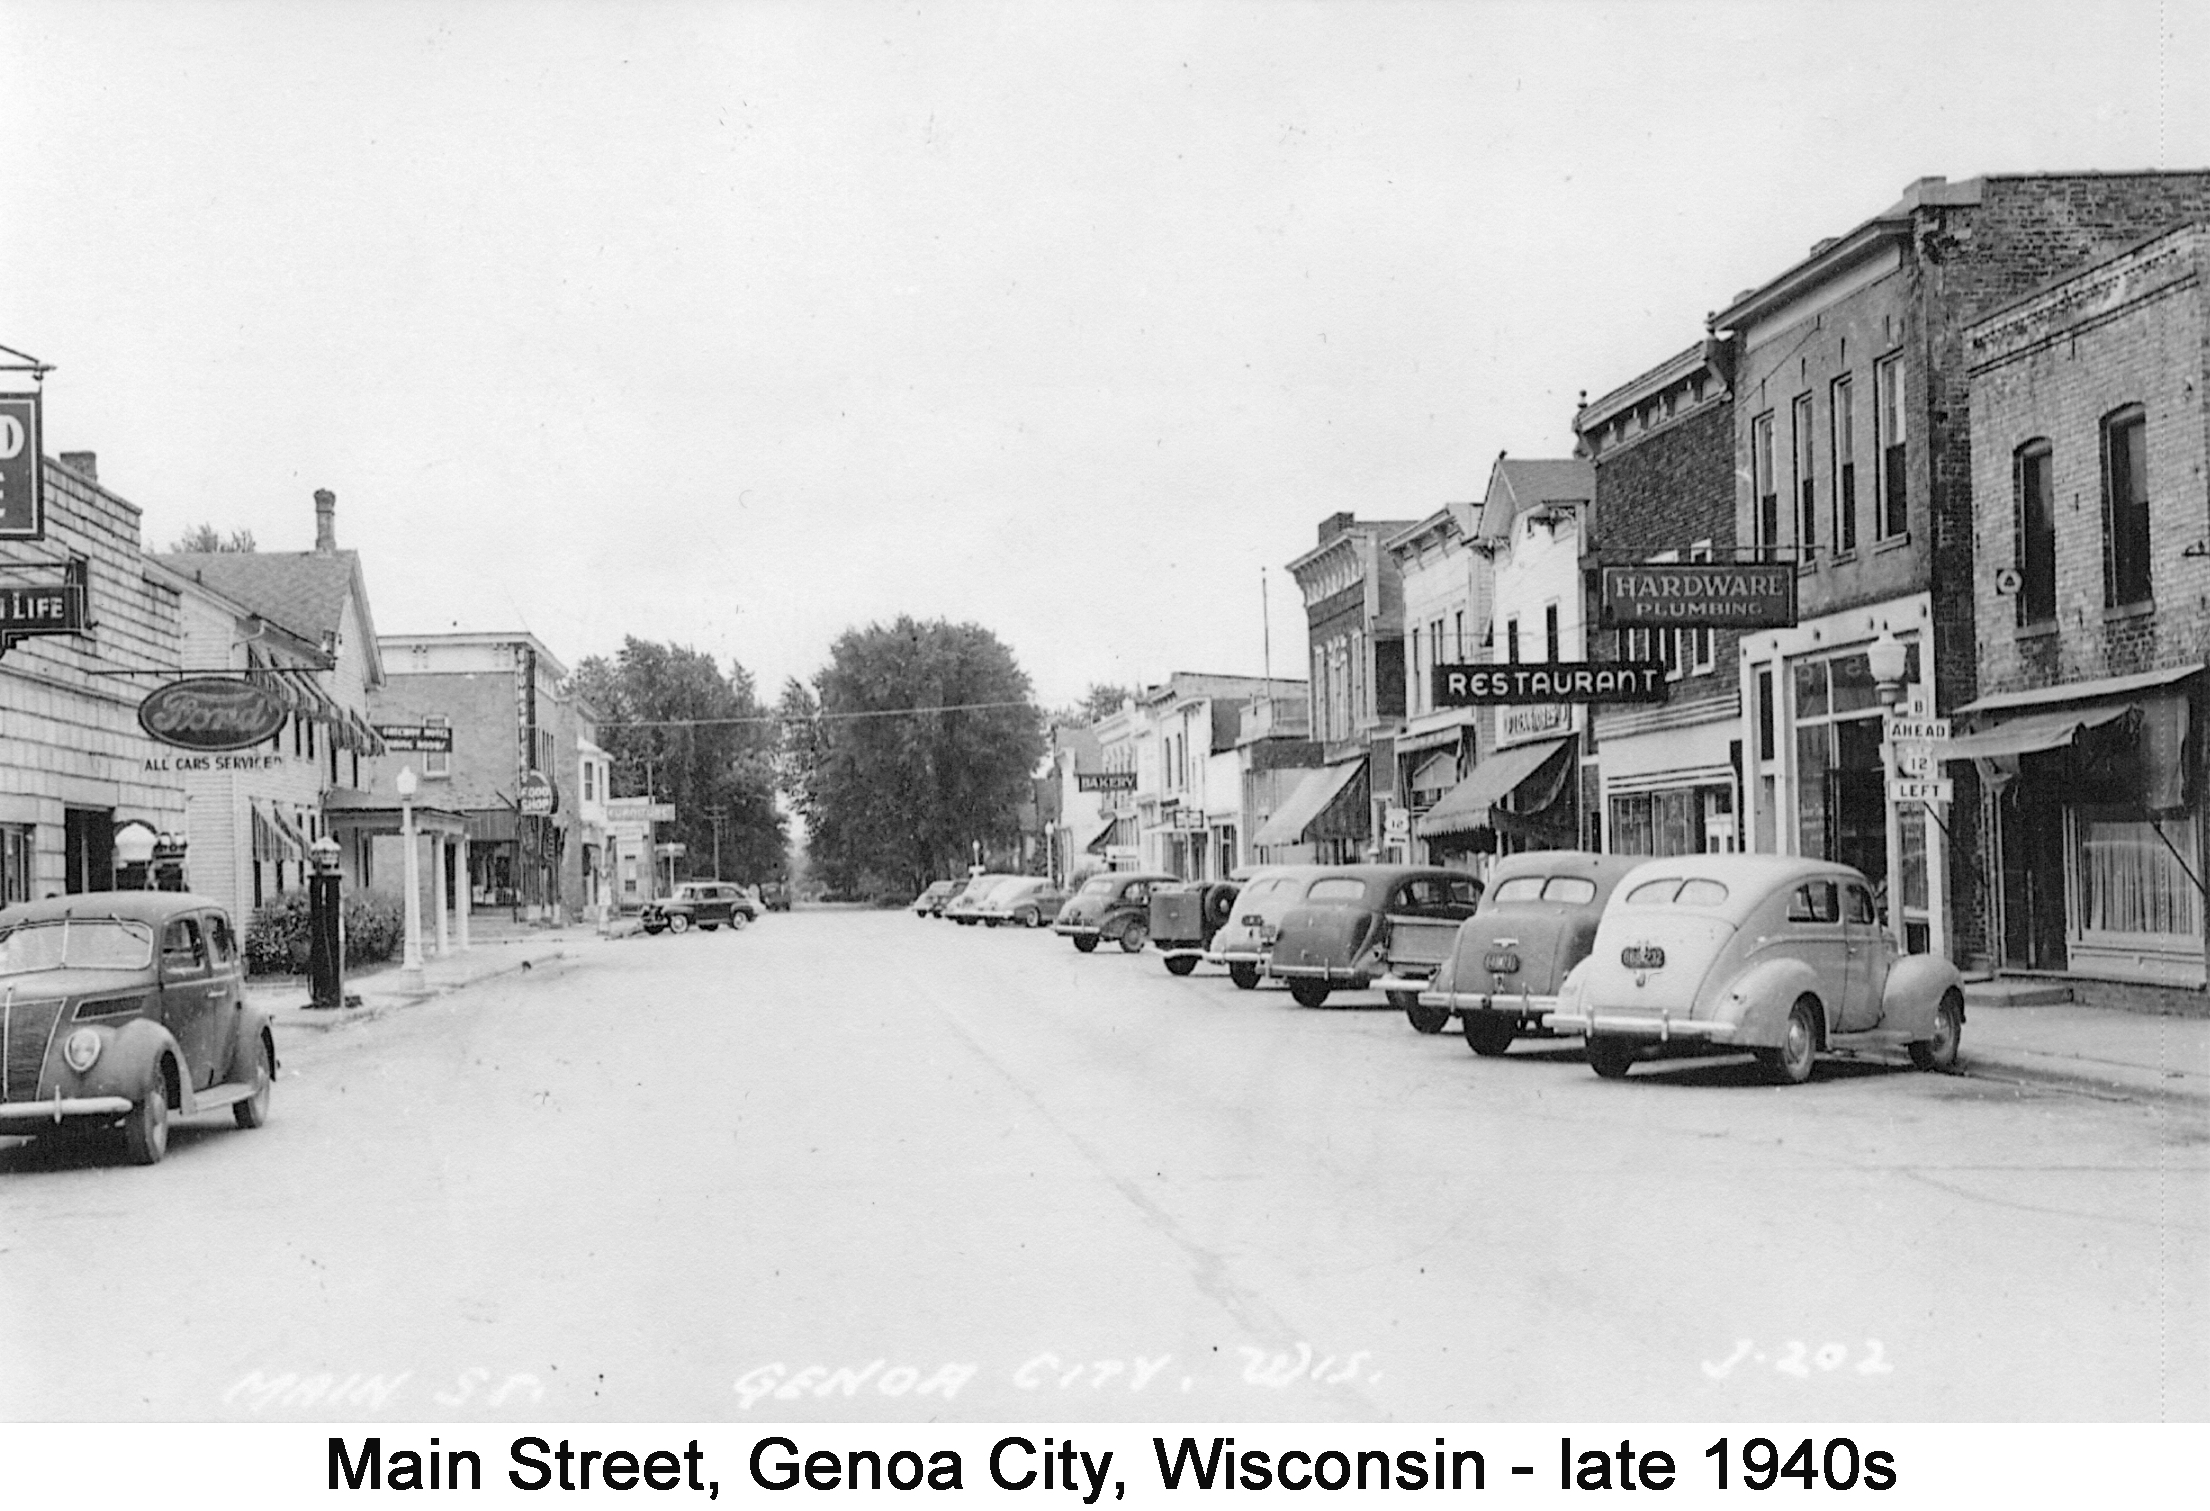 Looking north on Main Street in Genoa City with businesses on both sides